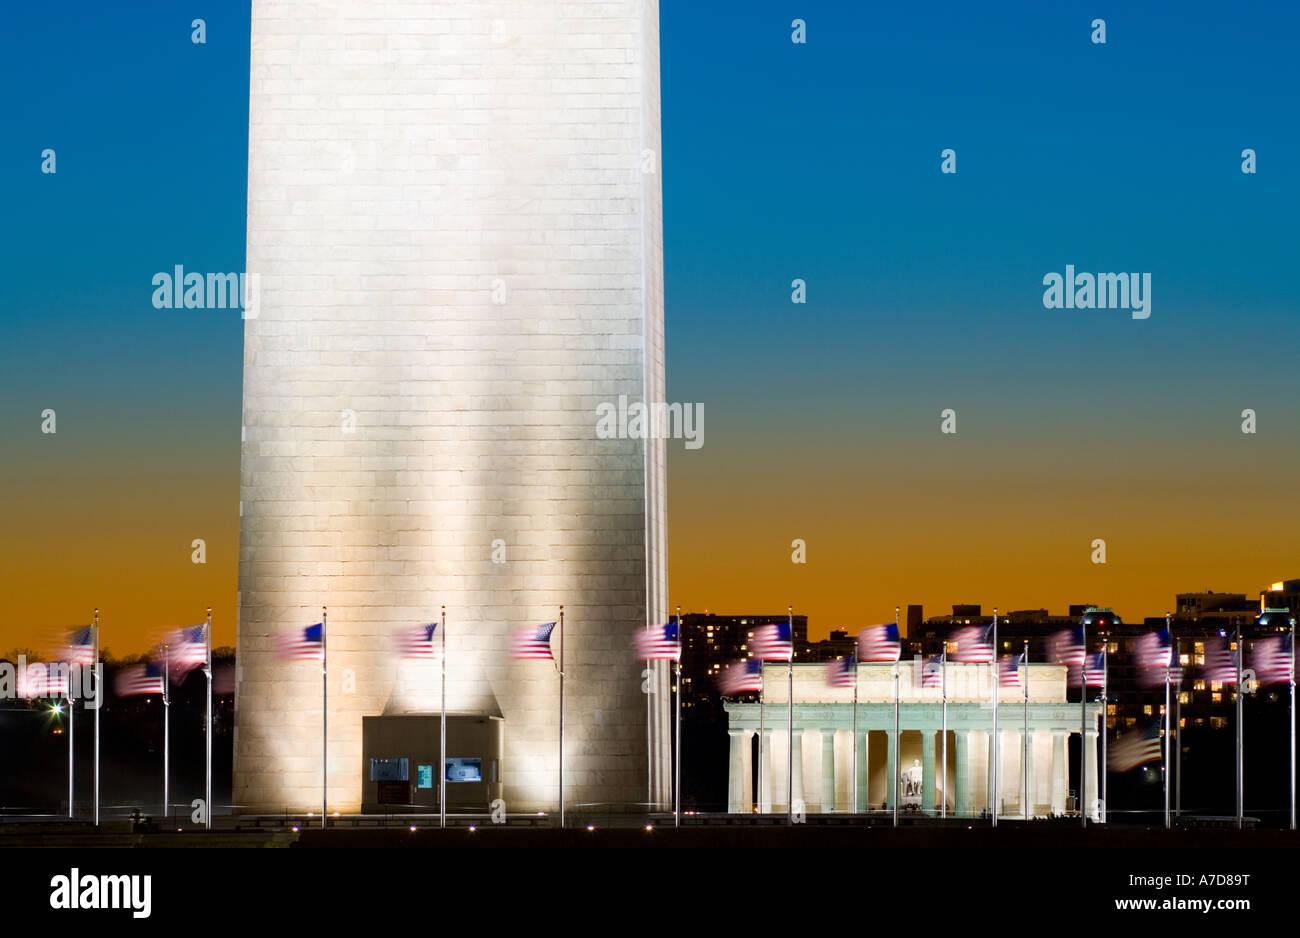 Washington Monument with Lincoln memorial in the background at dusk. Stock Photo